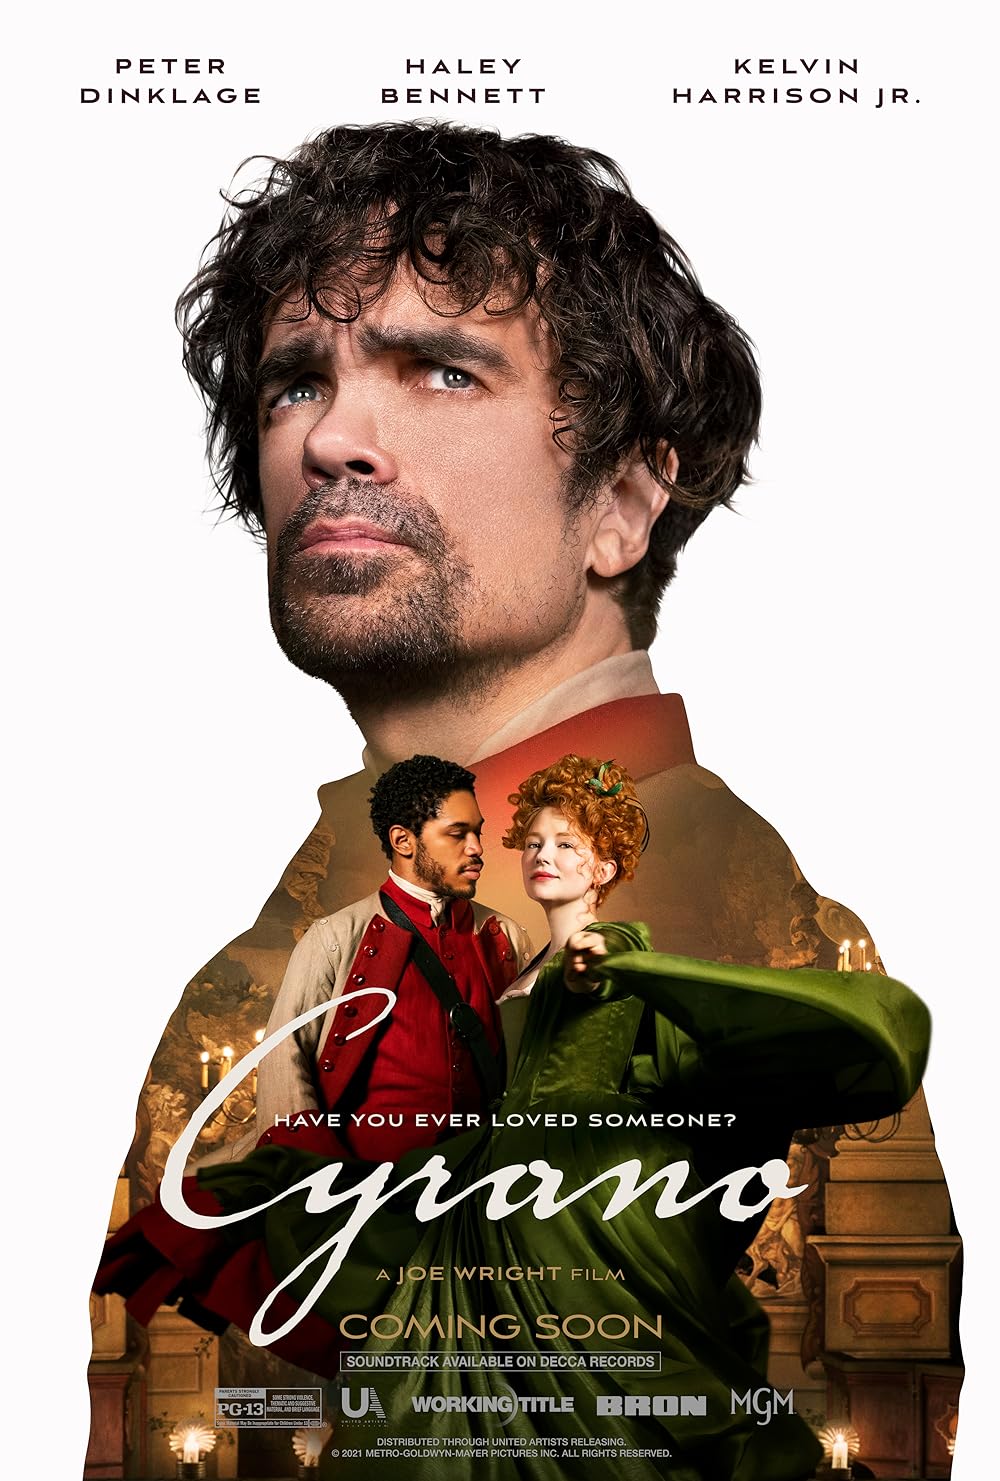 Joe Wright's 'Cyrano' is a retelling of Edmond Rostand's classic play, starring Peter Dinklage and Haley Bennett. The film offers a visually exquisite and musical take on the timeless tale of unrequited love. With its stunning performances and creative direction, it's a must-watch for those who appreciate romance with a touch of artistic flair.